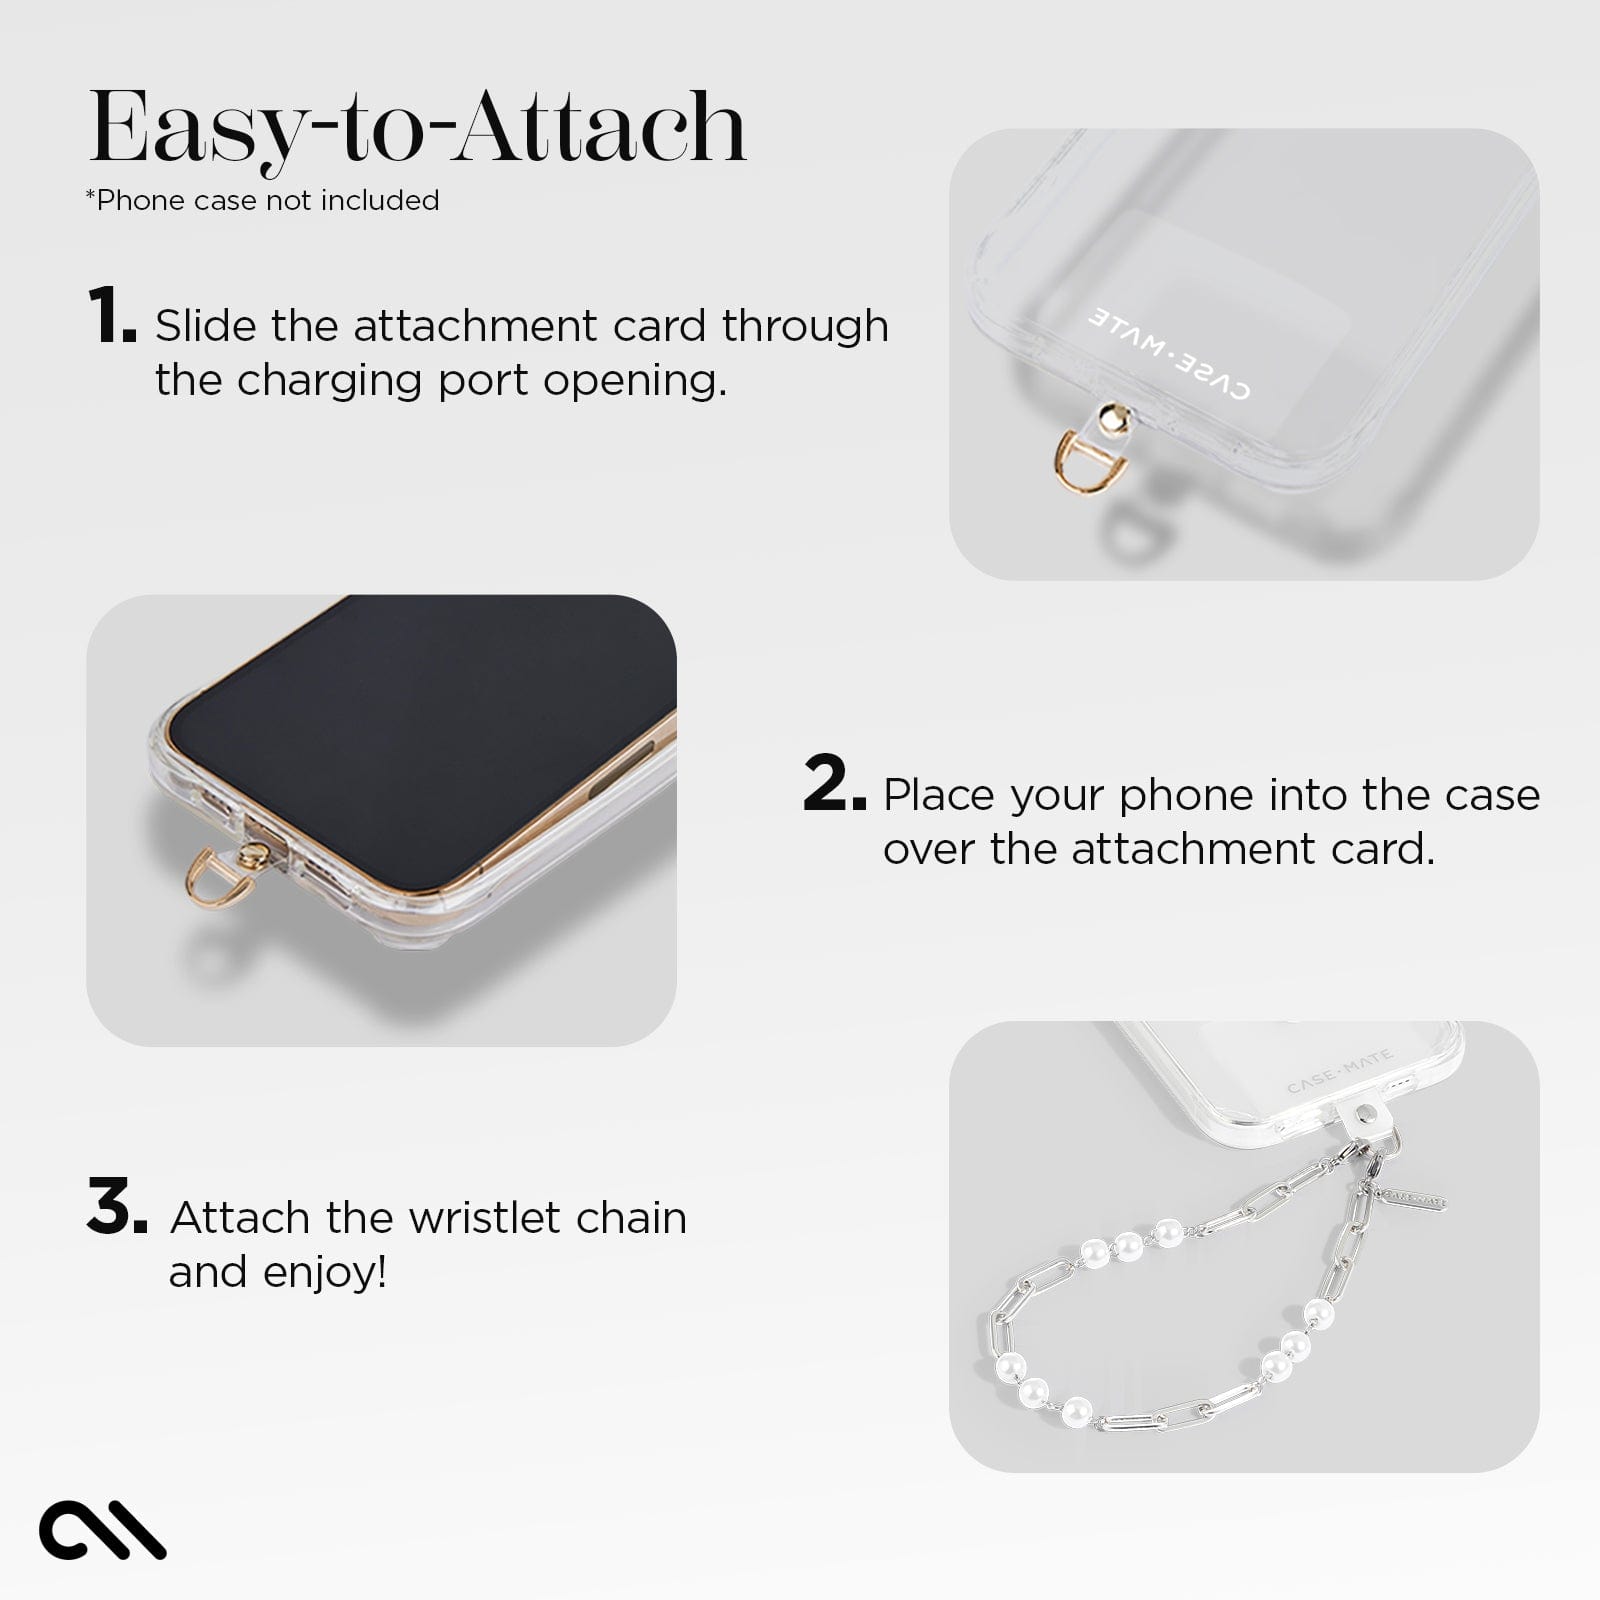 EASY-TO-ATTACH. 1. SLIDE THE ATTACHMENT CARD THROUGH THE CHARGING PORT OPENING. 2. PLACE YOUR PHONE INTO THE CASE OVER THE ATTACHMENT CARD. ATTACH THE WRISTLET CHAIN AND ENJOY!